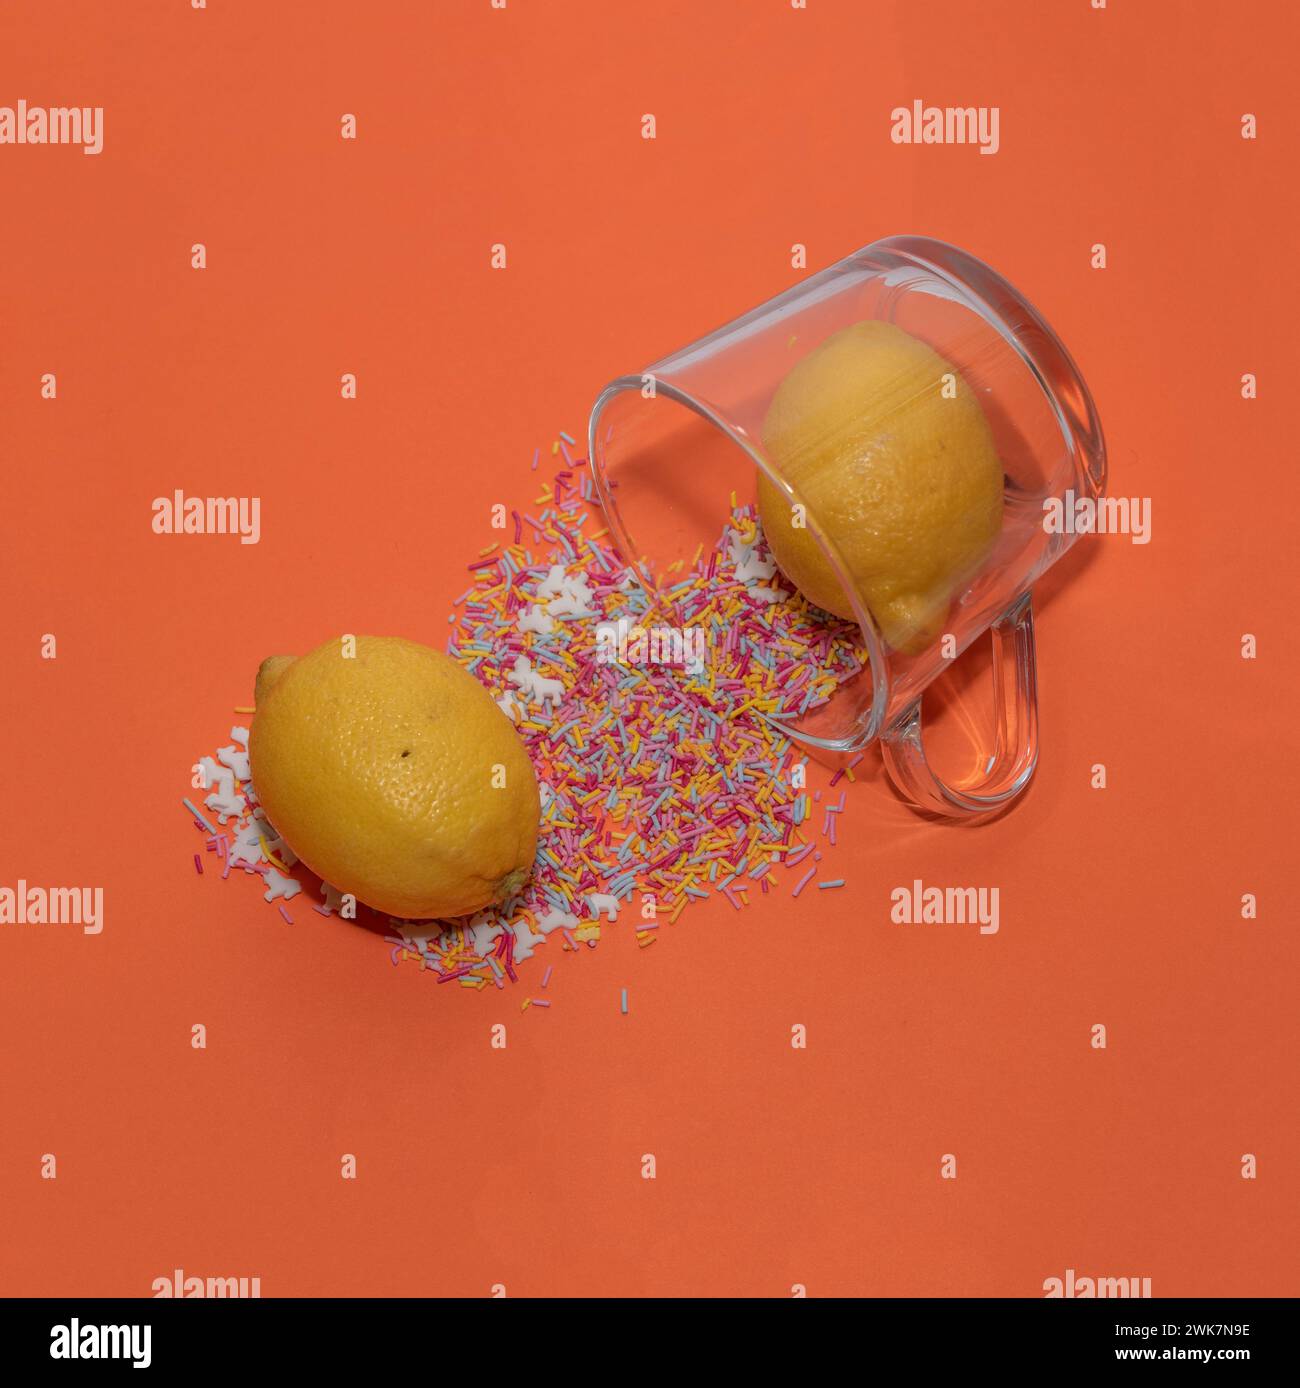 Lemons come out of the glass with sprinkles. Creative concept studio shot. Stock Photo